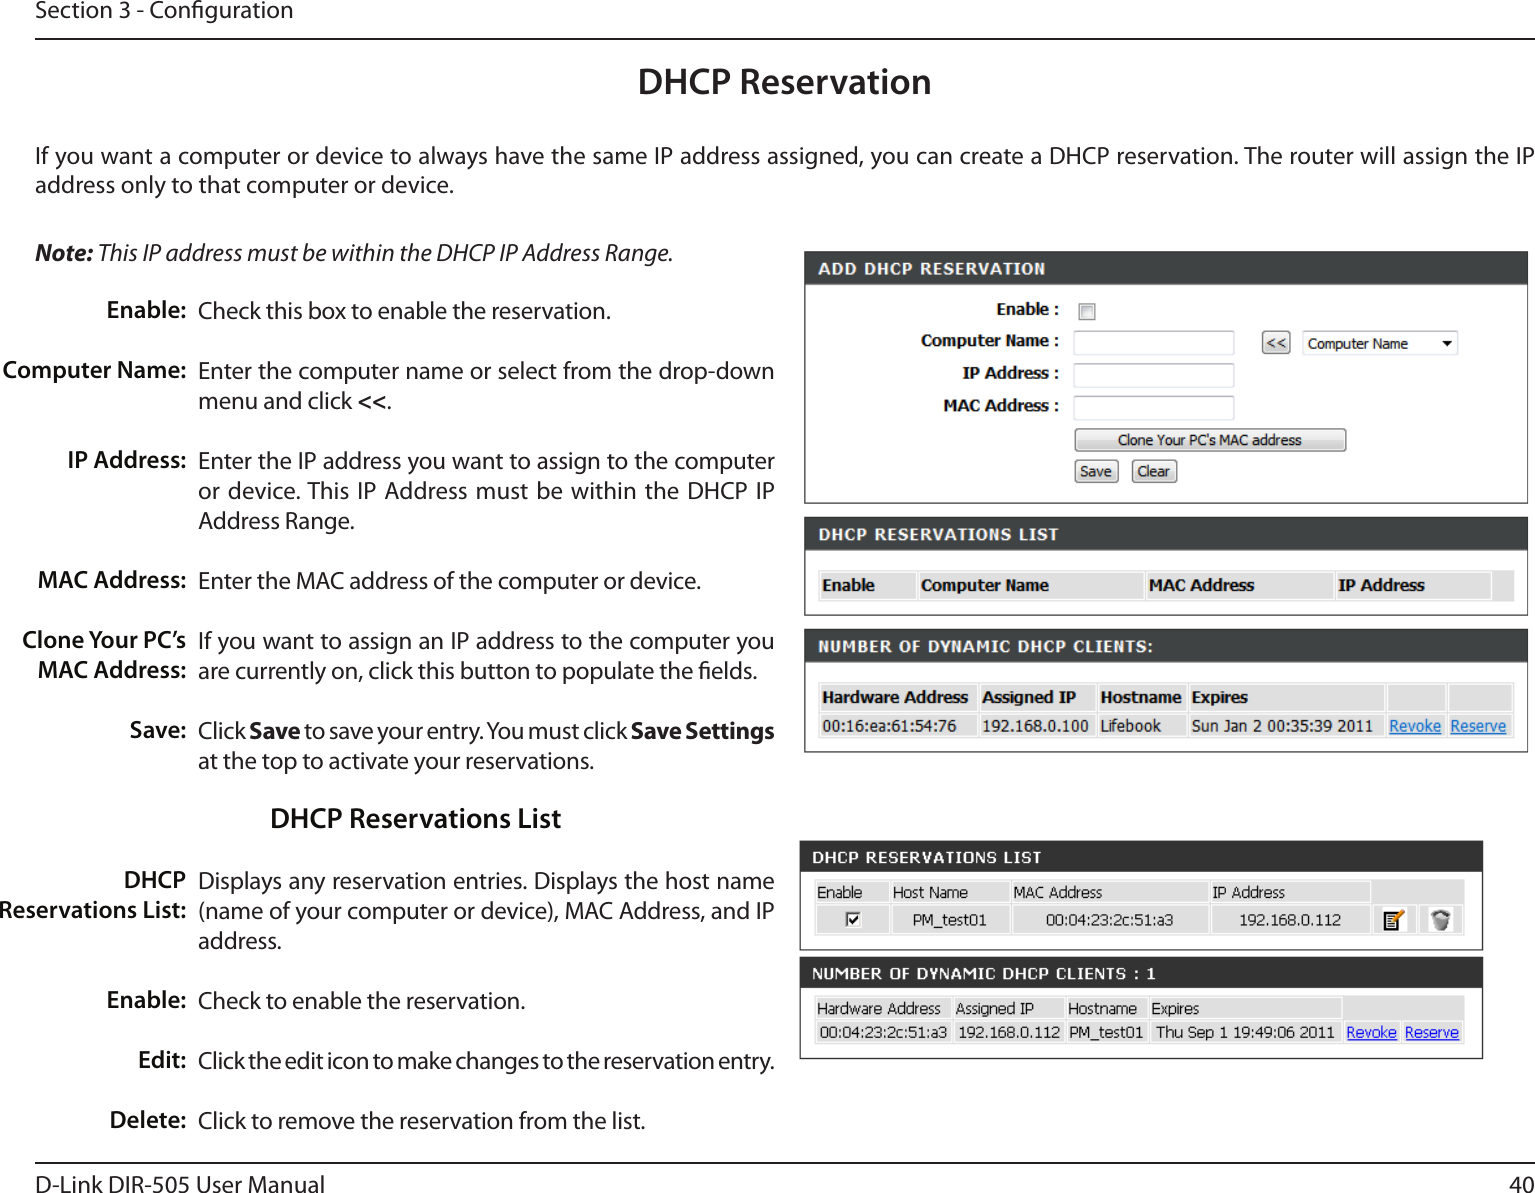 40D-Link DIR-505 User ManualSection 3 - CongurationDHCP ReservationIf you want a computer or device to always have the same IP address assigned, you can create a DHCP reservation. The router will assign the IP address only to that computer or device. Note: This IP address must be within the DHCP IP Address Range.Check this box to enable the reservation.Enter the computer name or select from the drop-down menu and click &lt;&lt;.Enter the IP address you want to assign to the computer or device. This IP Address must be within the  DHCP IP Address Range.Enter the MAC address of the computer or device.If you want to assign an IP address to the computer you are currently on, click this button to populate the elds. Click Save to save your entry. You must click Save Settings at the top to activate your reservations. Displays any reservation entries. Displays the host name (name of your computer or device), MAC Address, and IP address.Check to enable the reservation.Click the edit icon to make changes to the reservation entry.Click to remove the reservation from the list.Enable:Computer Name:IP Address:MAC Address:Clone Your PC’s MAC Address:Save:DHCP Reservations List:Enable:Edit:Delete:DHCP Reservations List